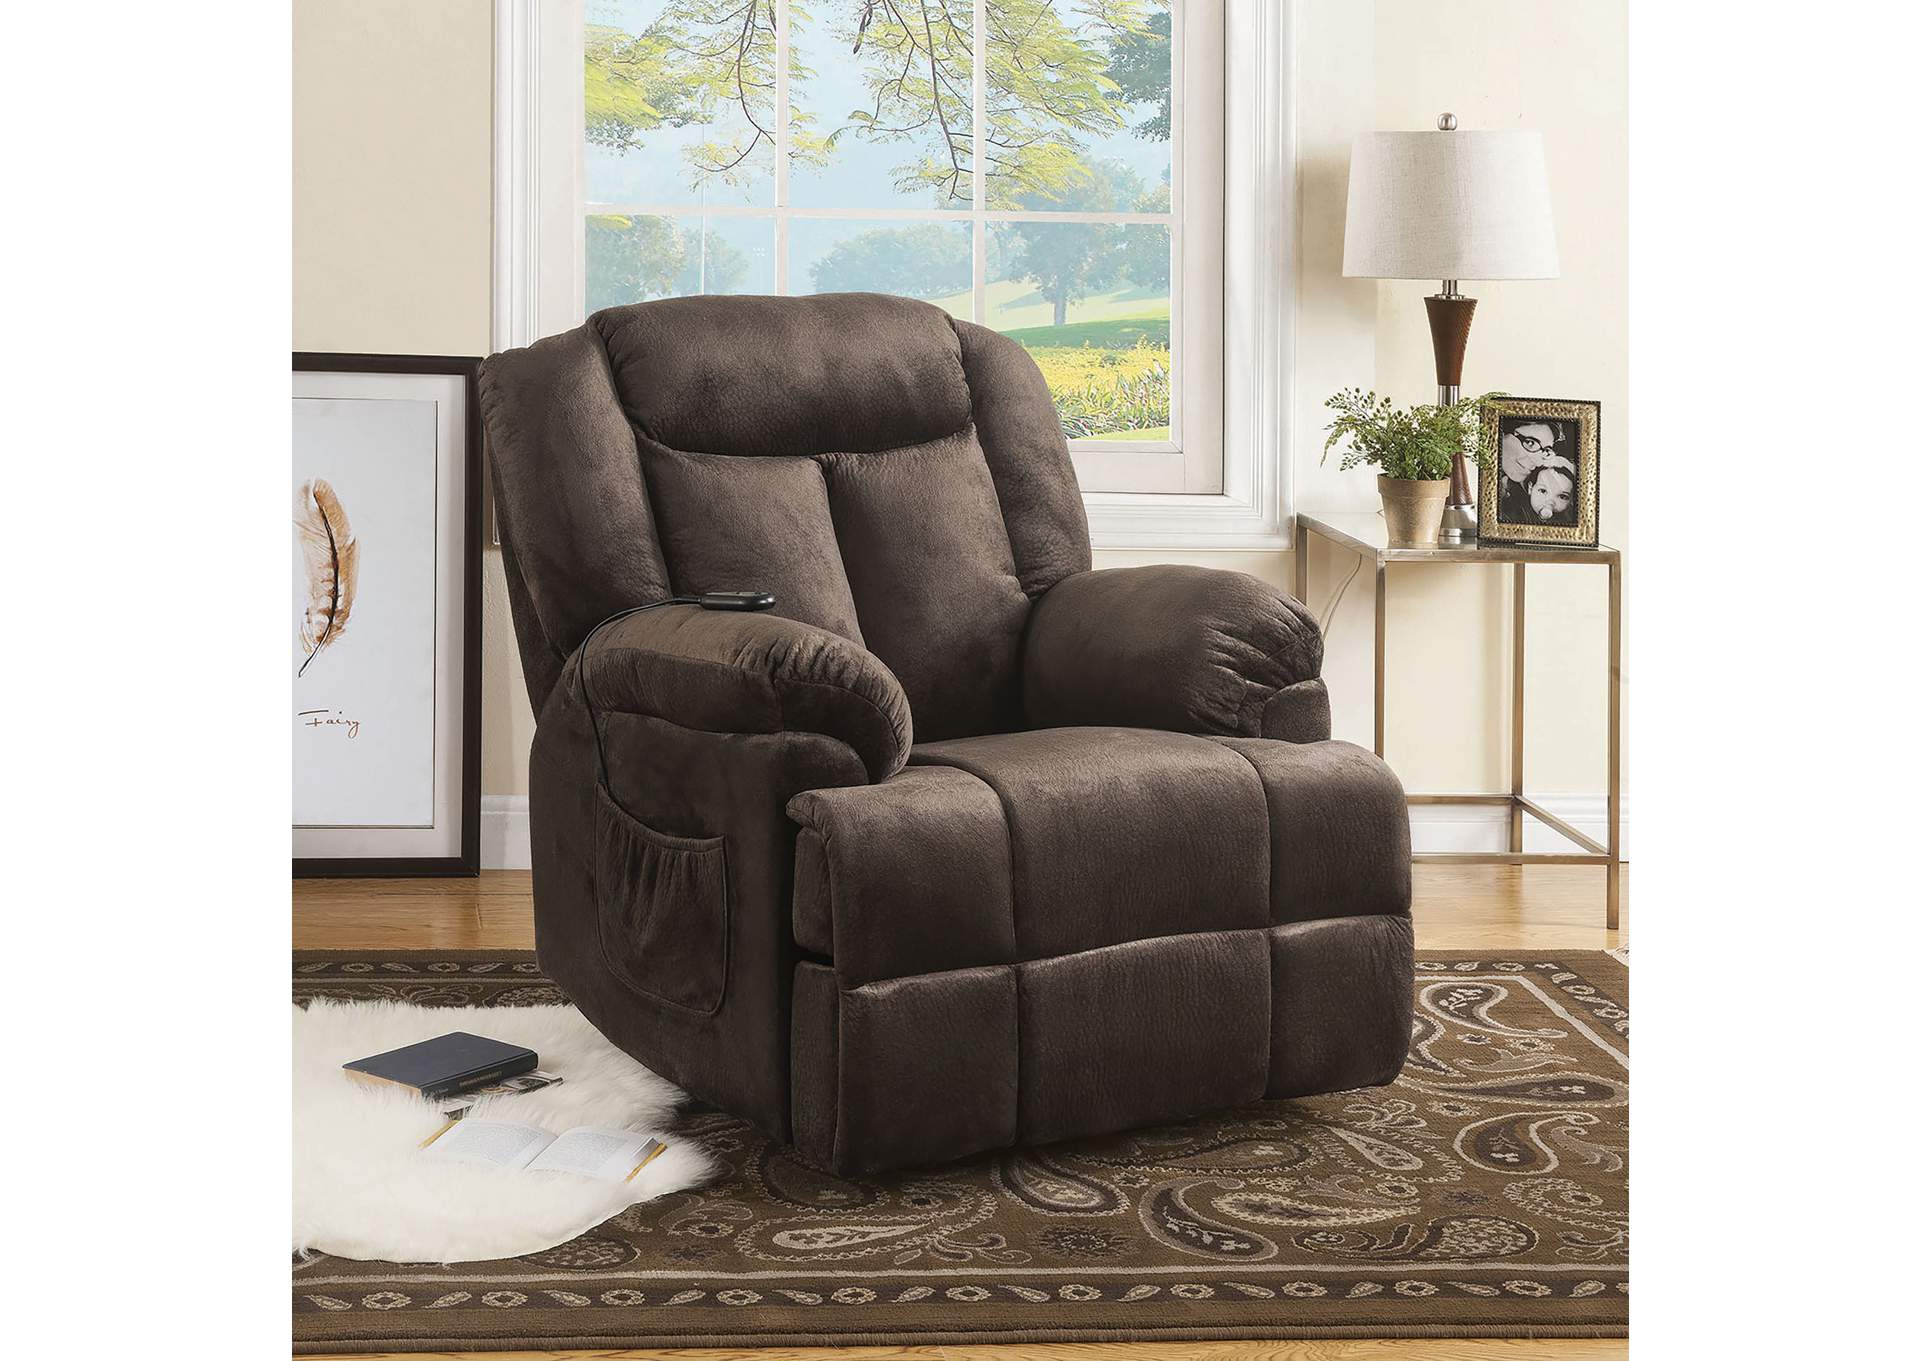 Chocolate Power Lift Recliner,ABF Coaster Furniture